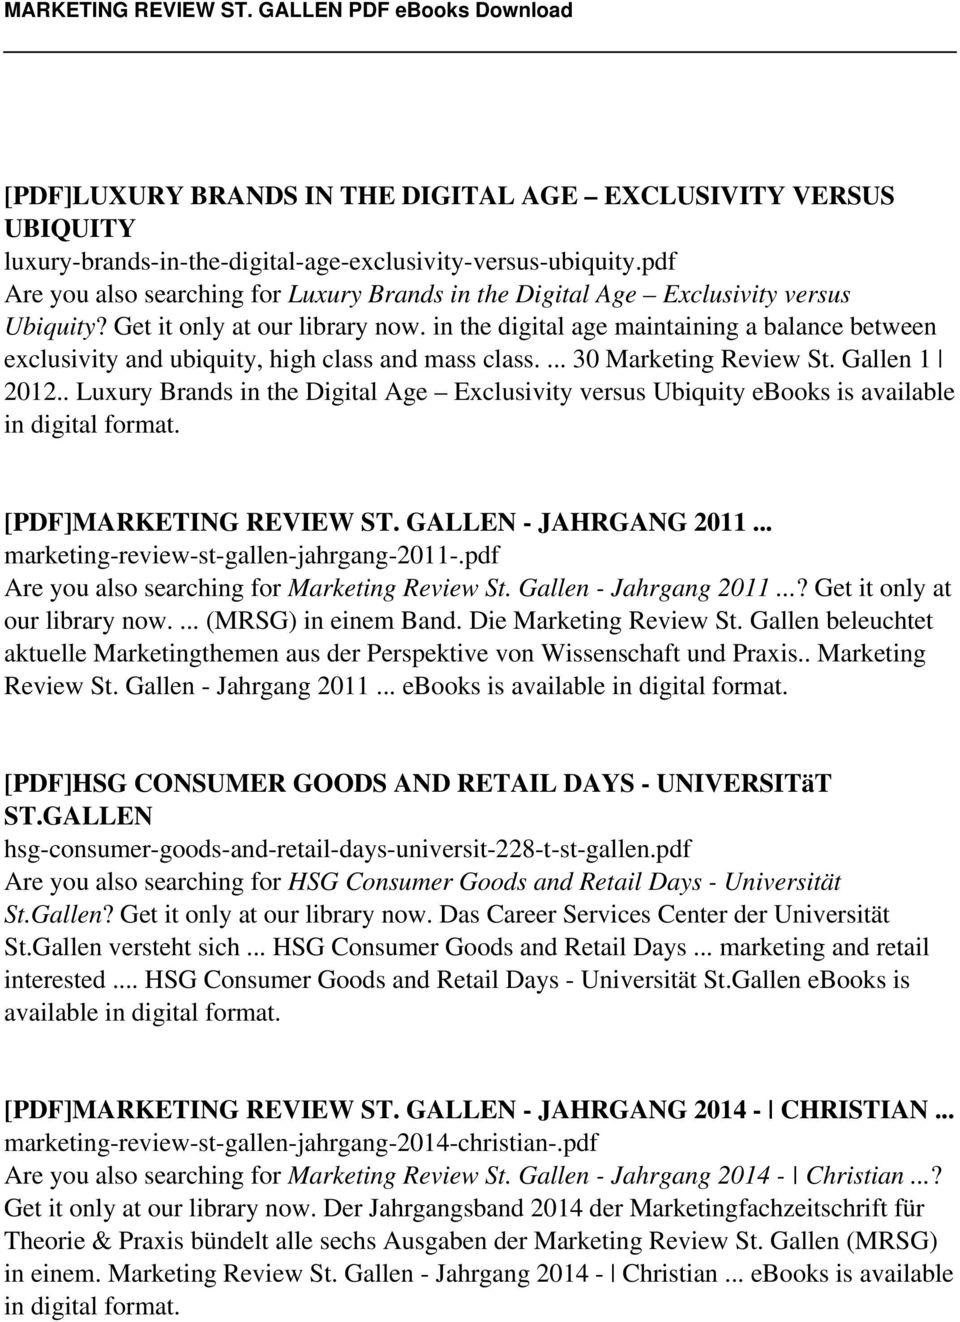 in the digital age maintaining a balance between exclusivity and ubiquity, high class and mass class.... 30 Marketing Review St. Gallen 1 2012.